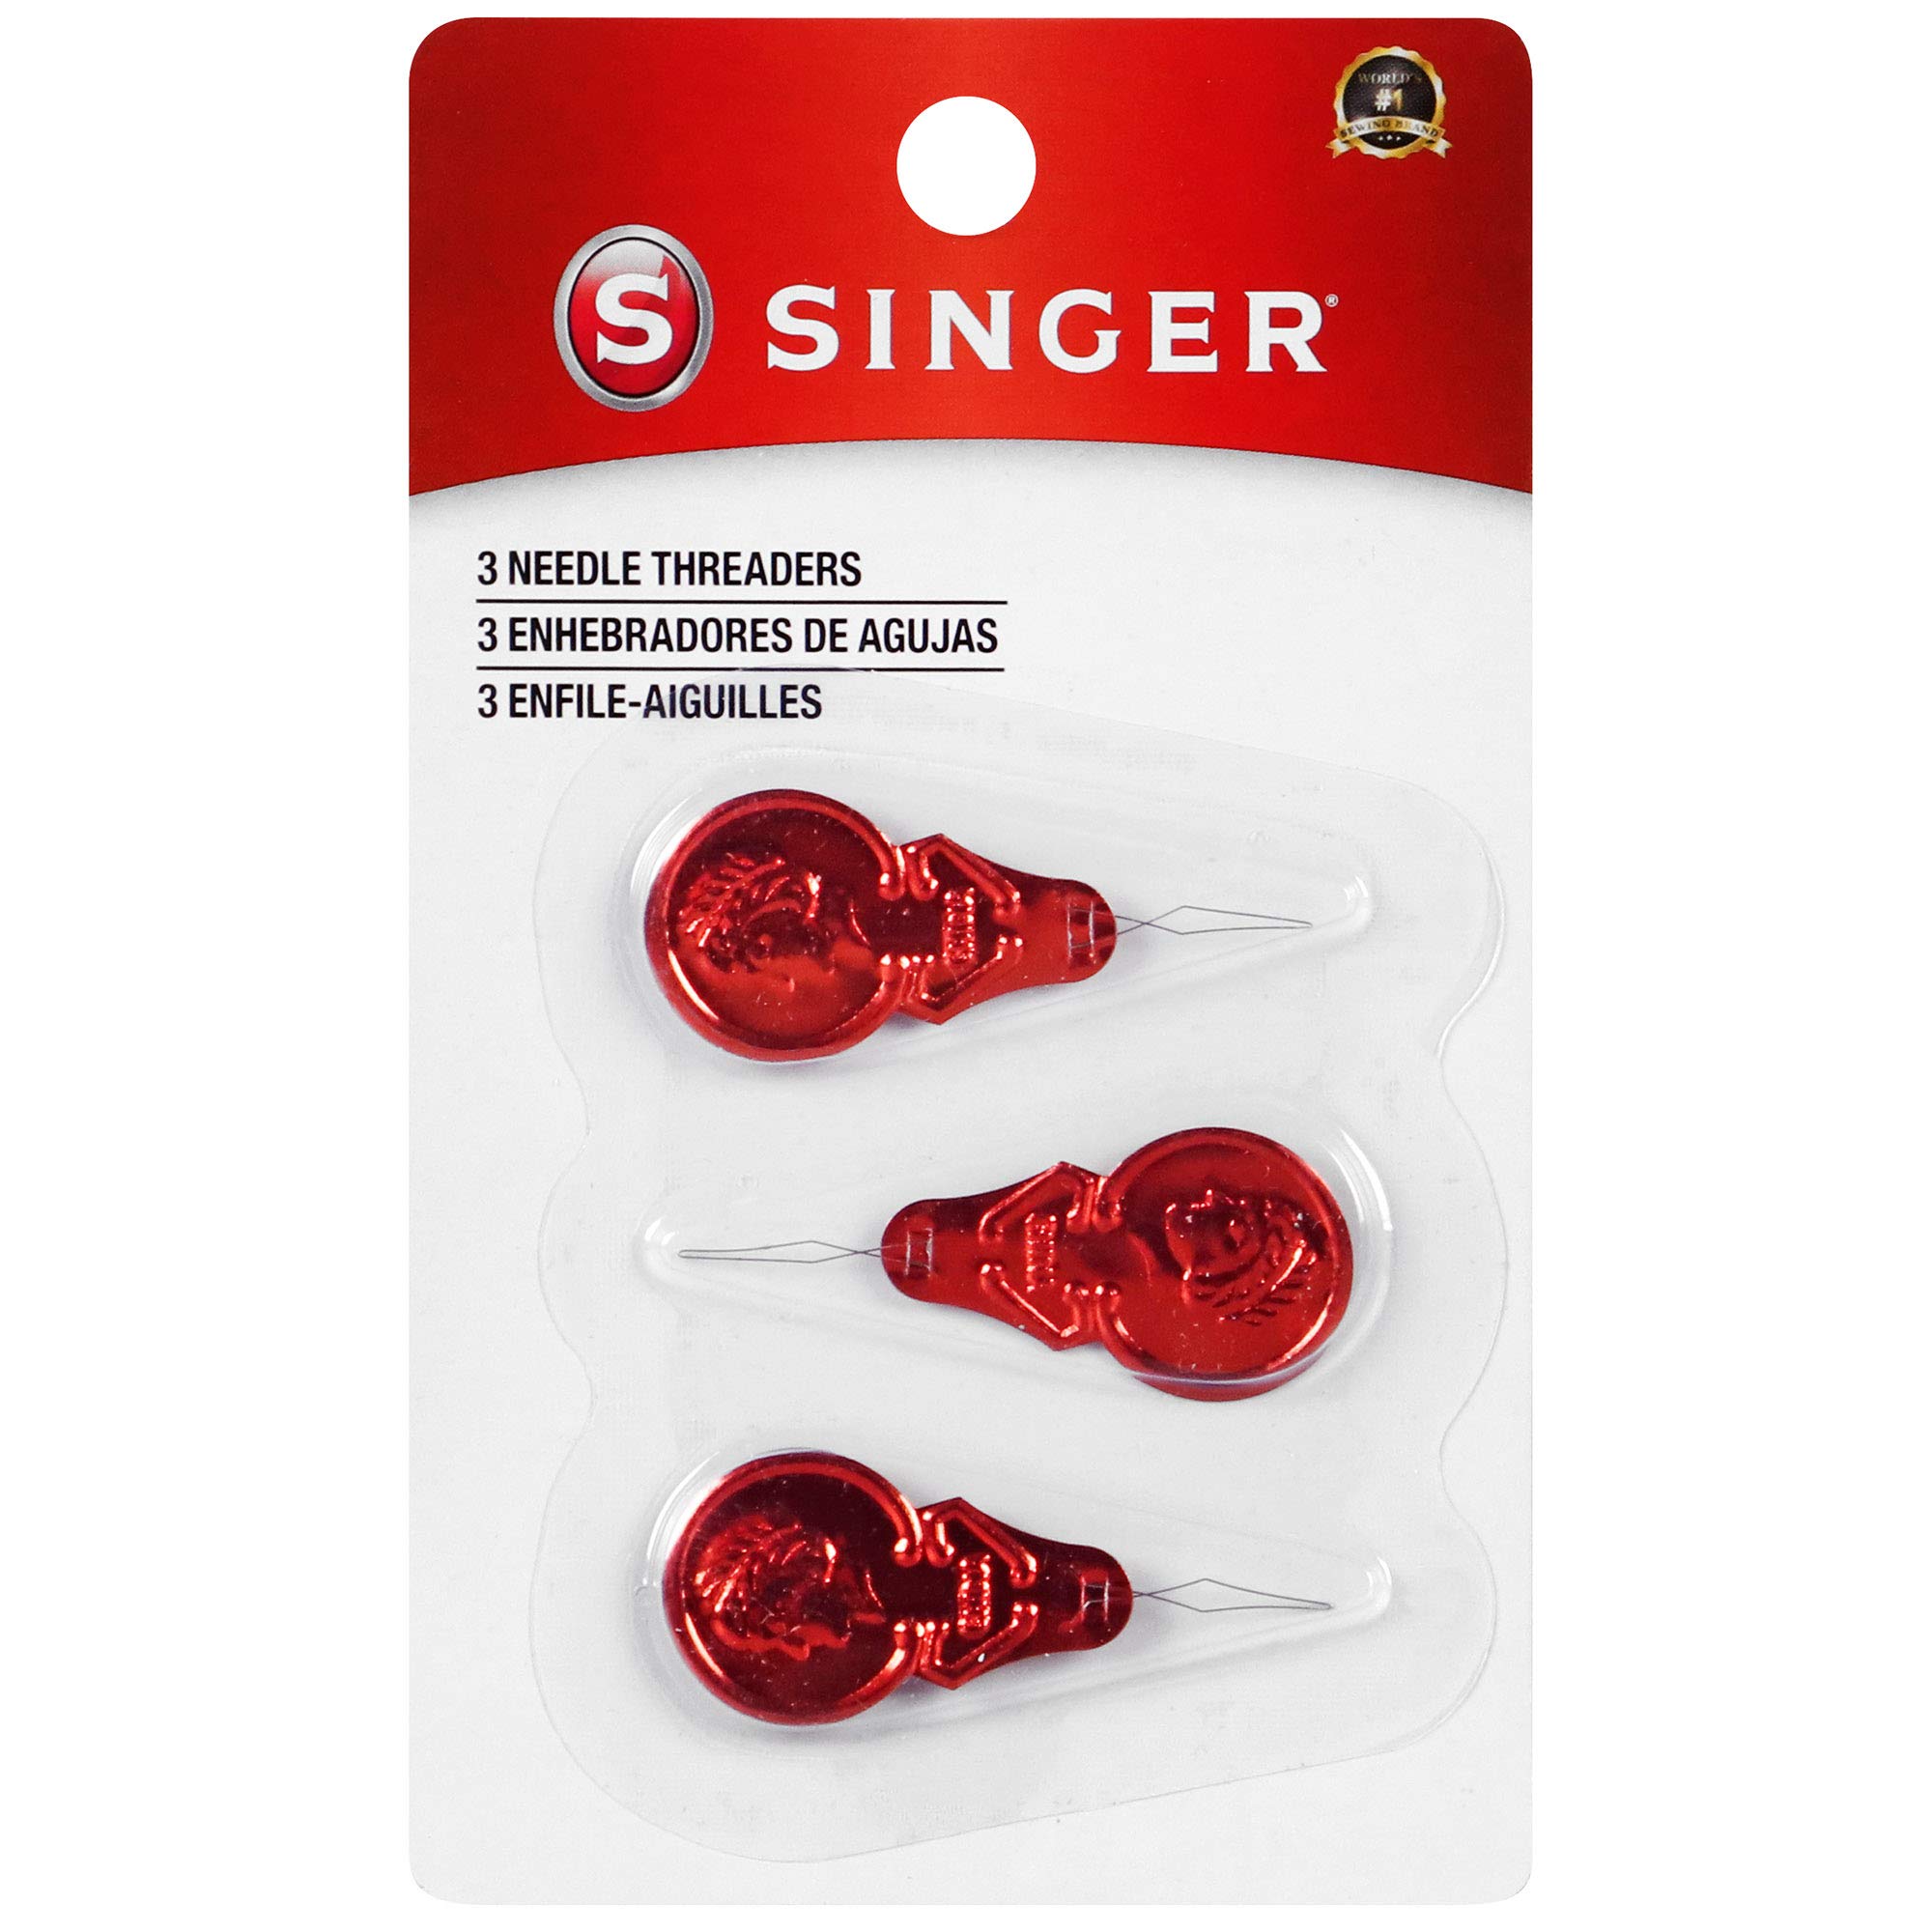 SINGER 00058 Metal Needle Threaders, 3 Count (Pack of 1), White, RED